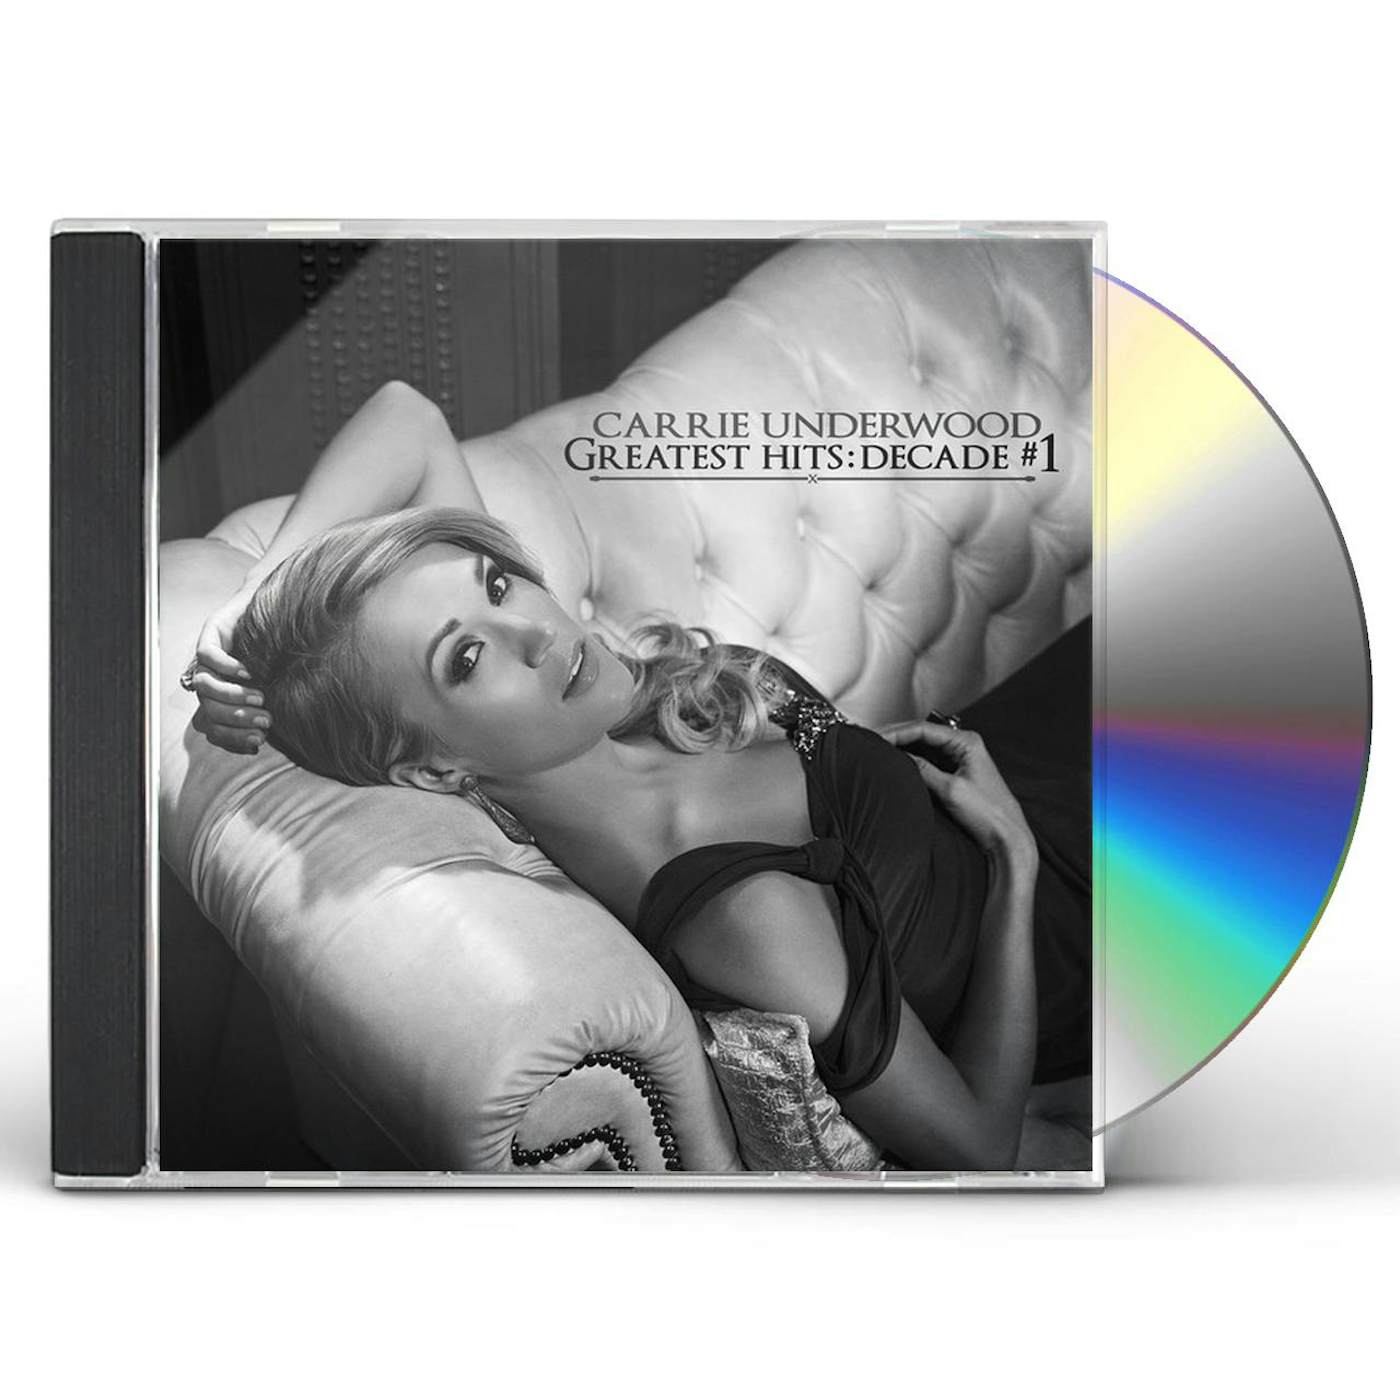 Carrie Underwood GREATEST HITS: DECADE #1 CD